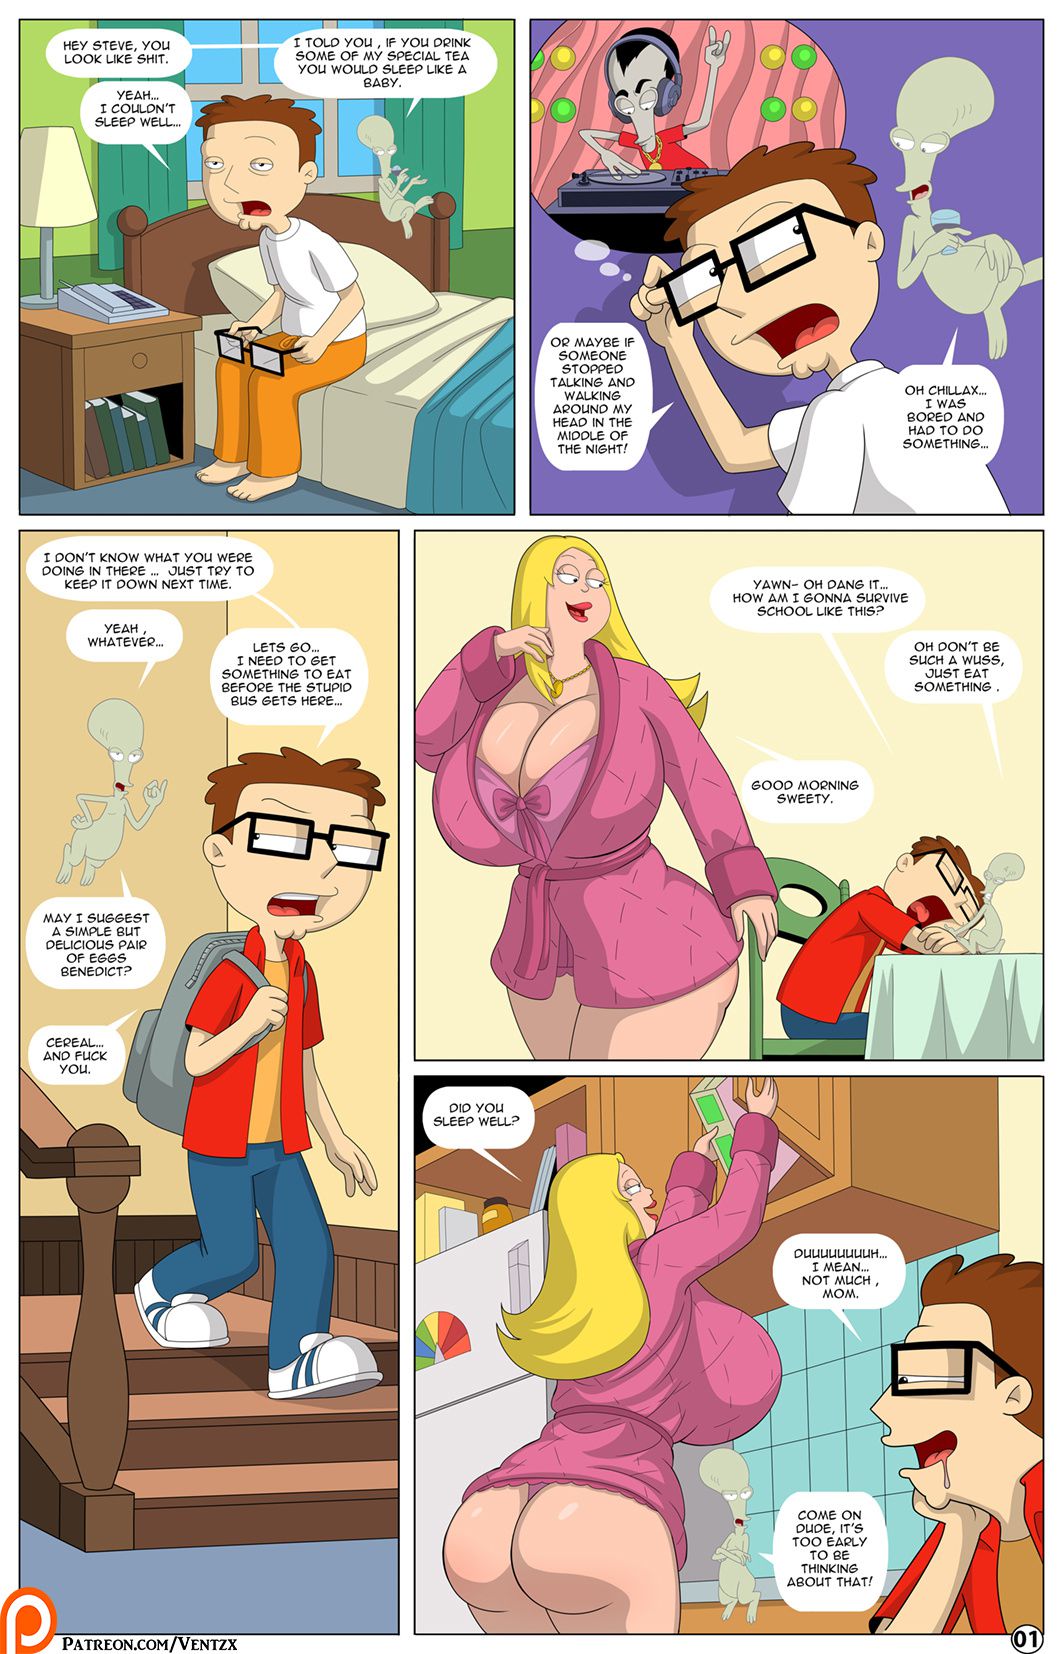 [Arabatos] The Tales of an American Son (American Dad) Chapter 2 (ongoing) 1